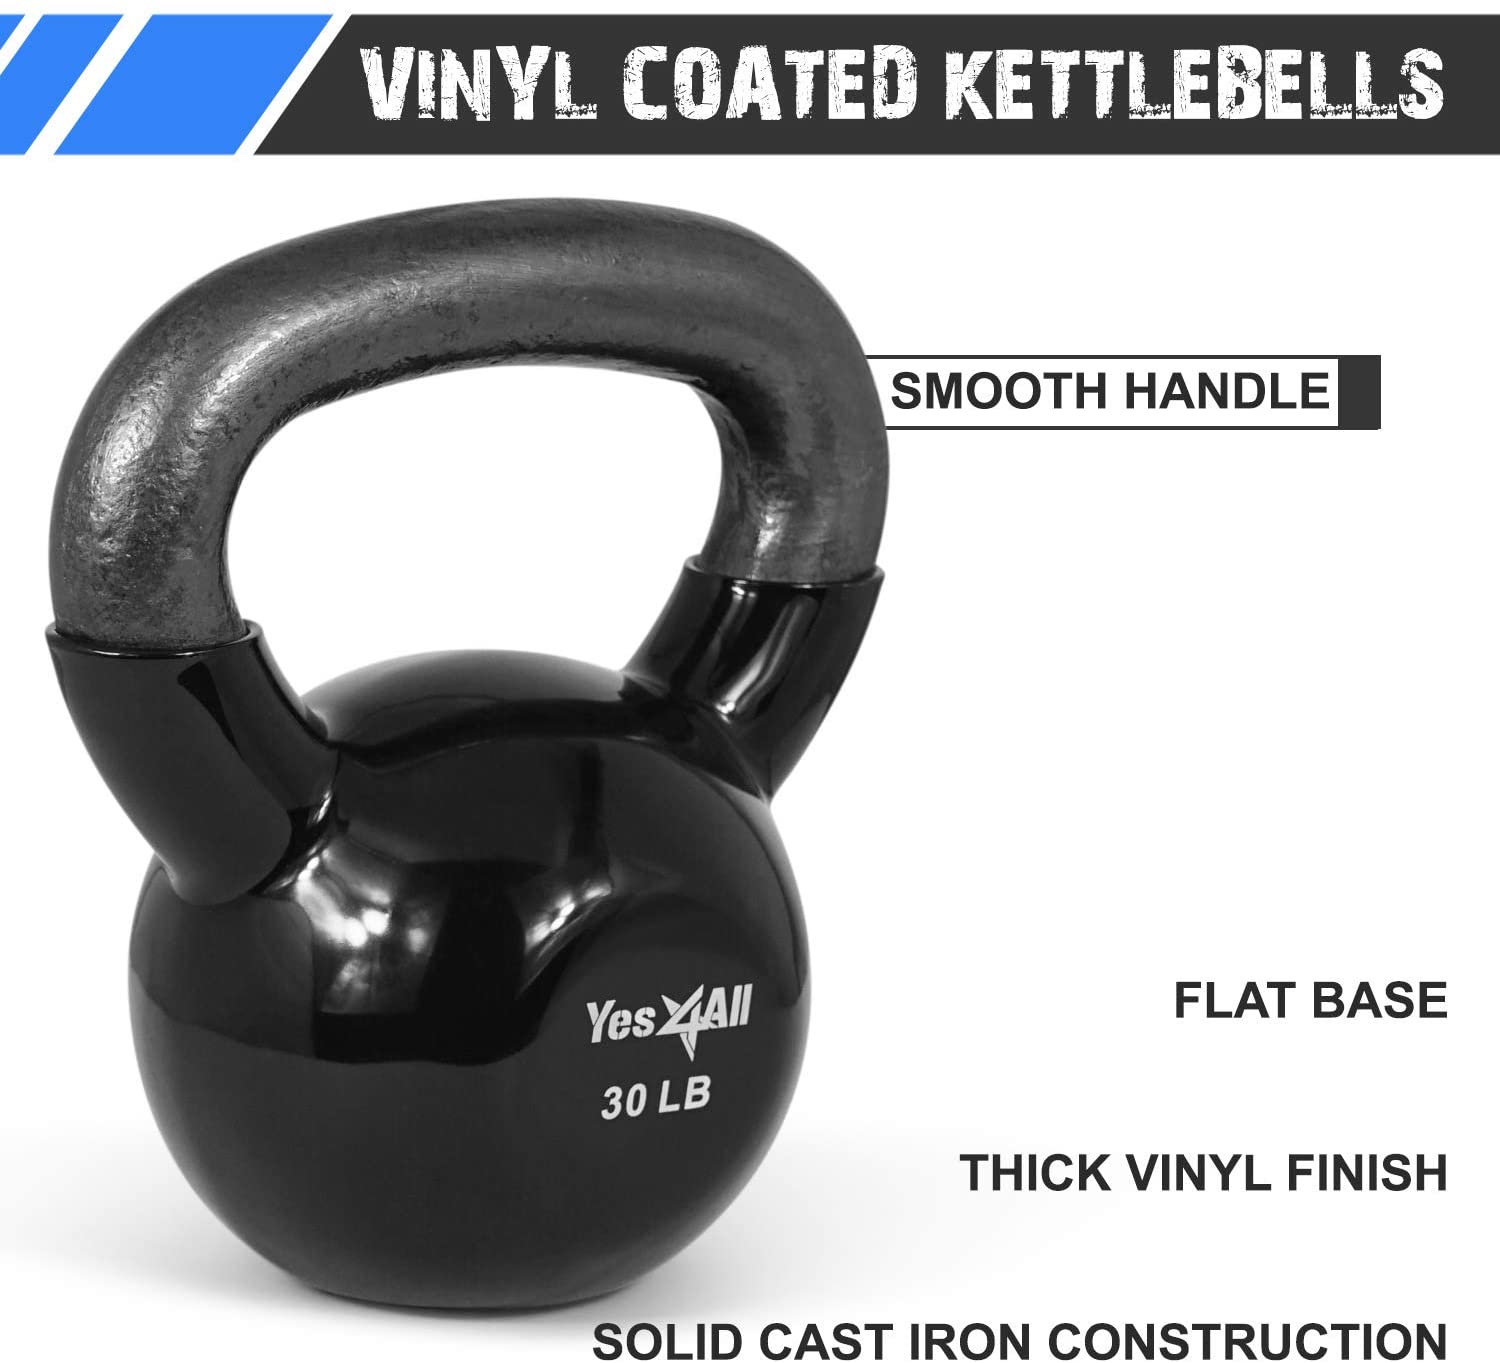 Yes4All 25 lb Vinyl Coated / PVC Kettlebell, Black, Combo / Set, Includes 10-15lb - image 5 of 8